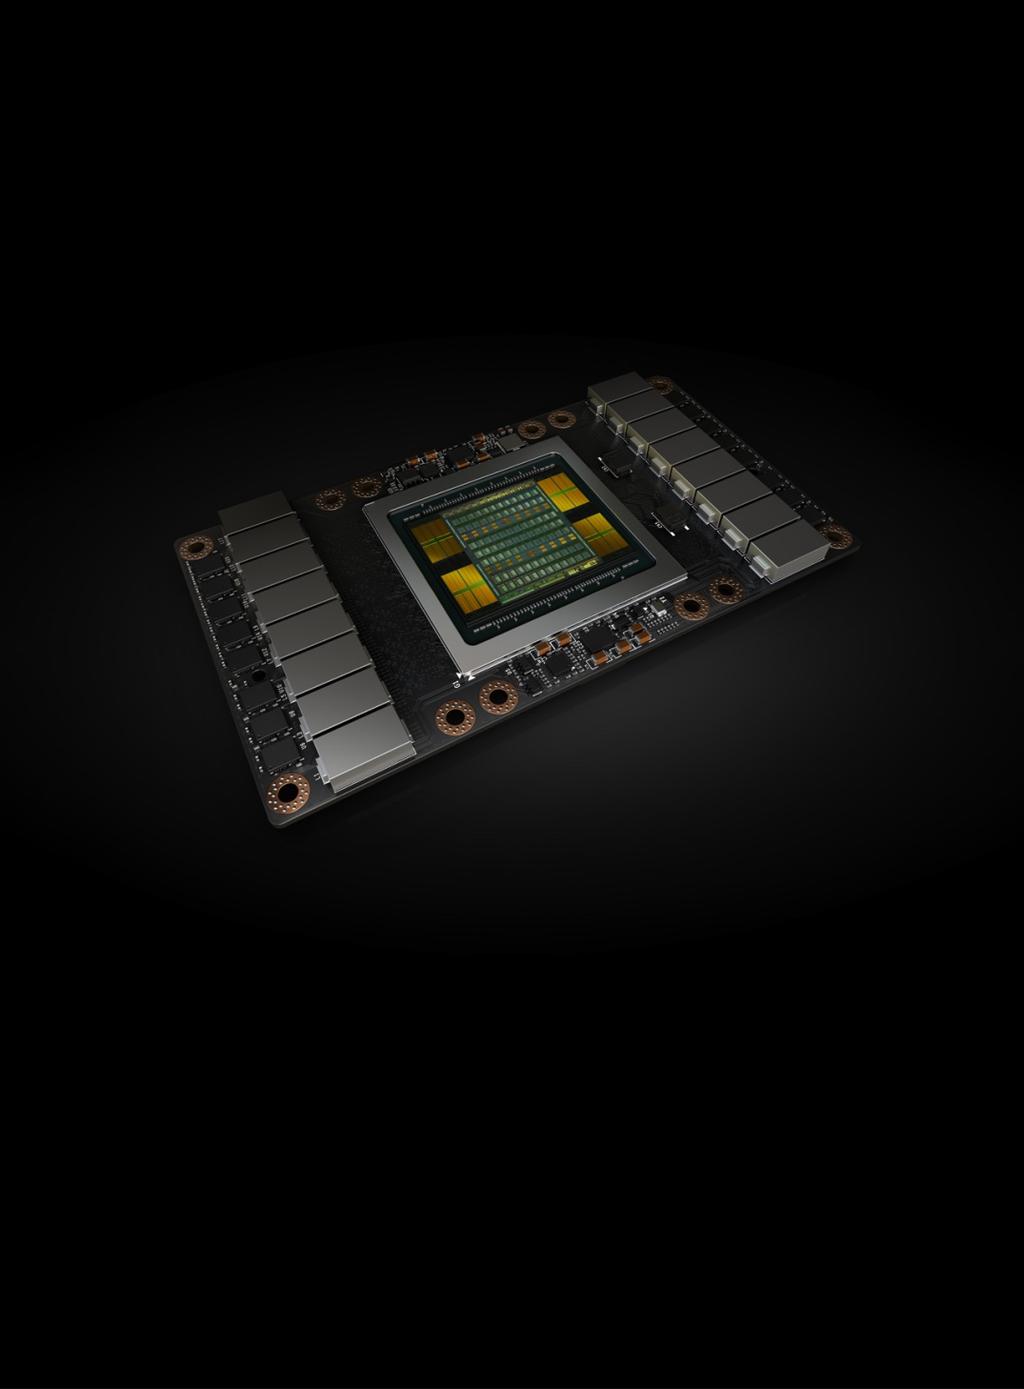 REVOLUTIONARY AI PERFORMANCE 3X system performance over prior generation Software stack delivers additional 30% faster training performance vs other GPU systems NVIDIA DGX unlocks the full